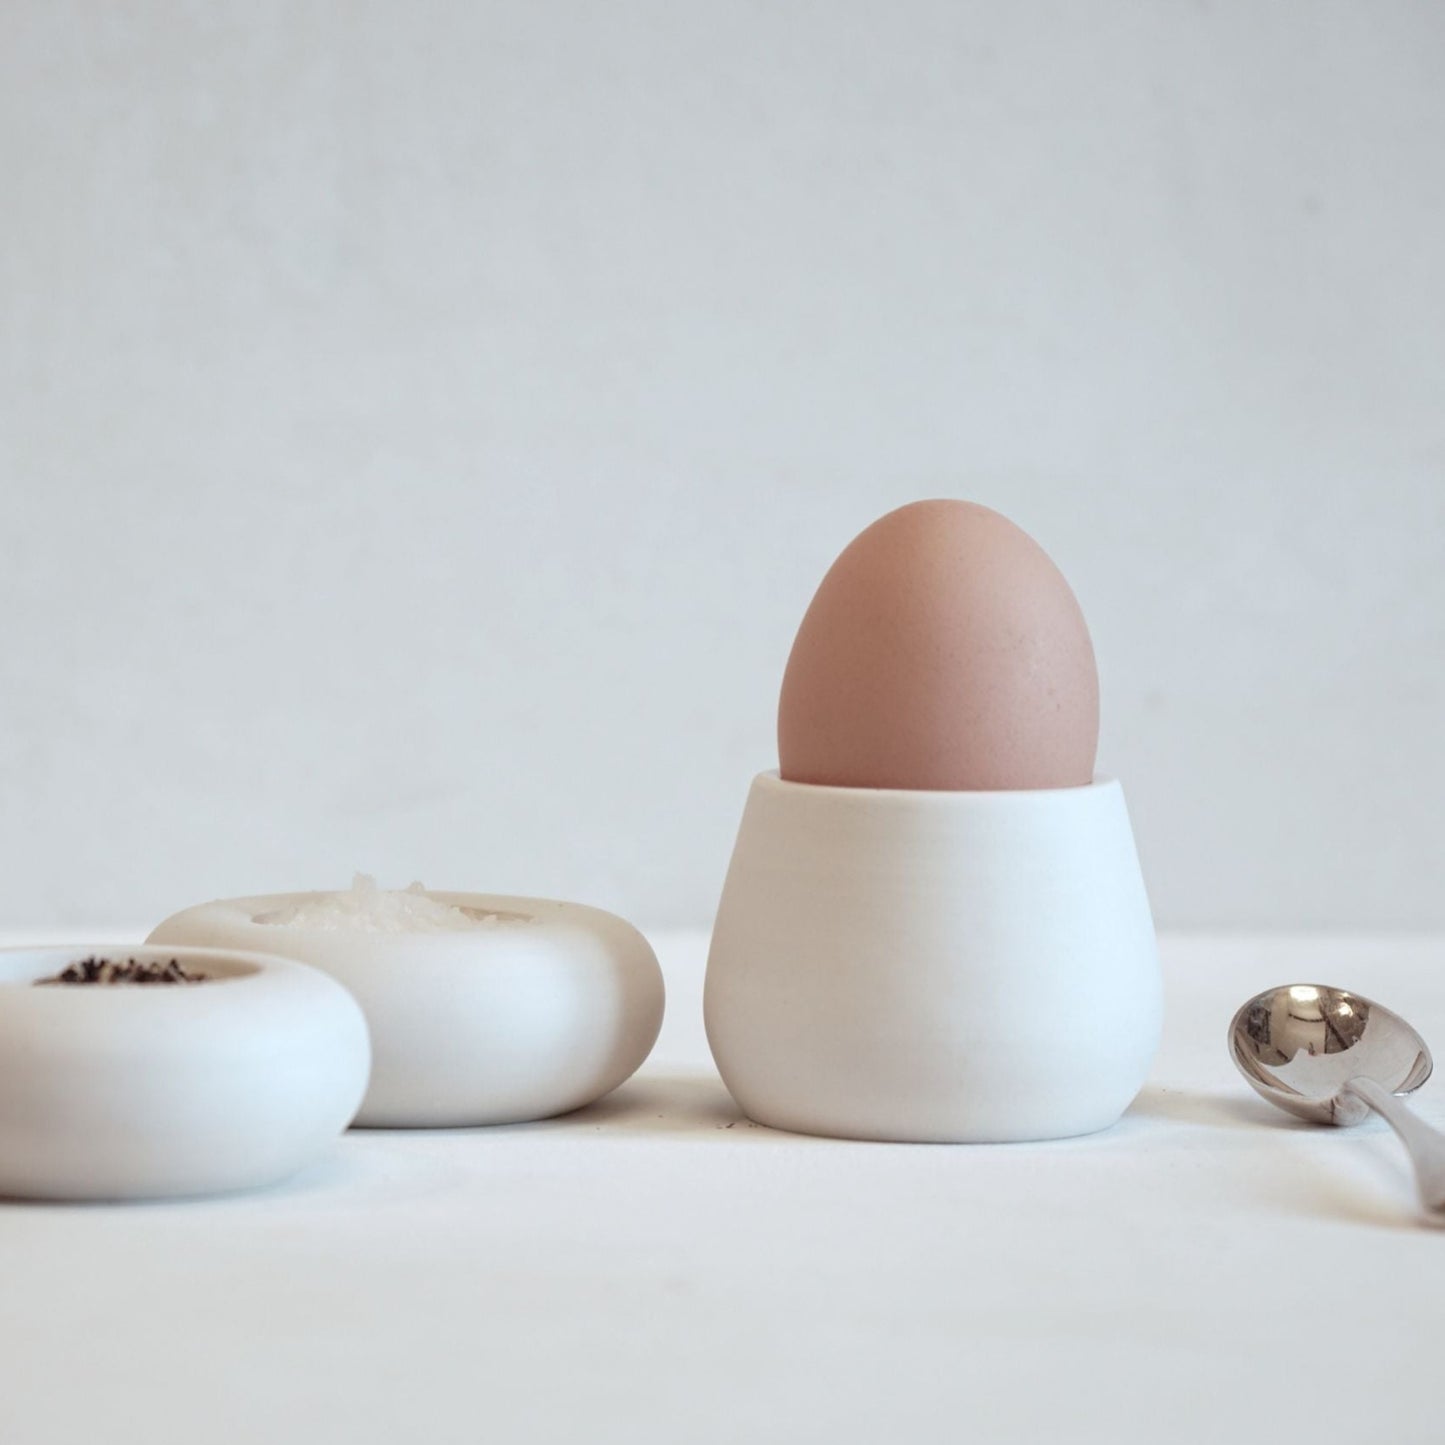 Simple Egg Cup with Simple Pinch Pots